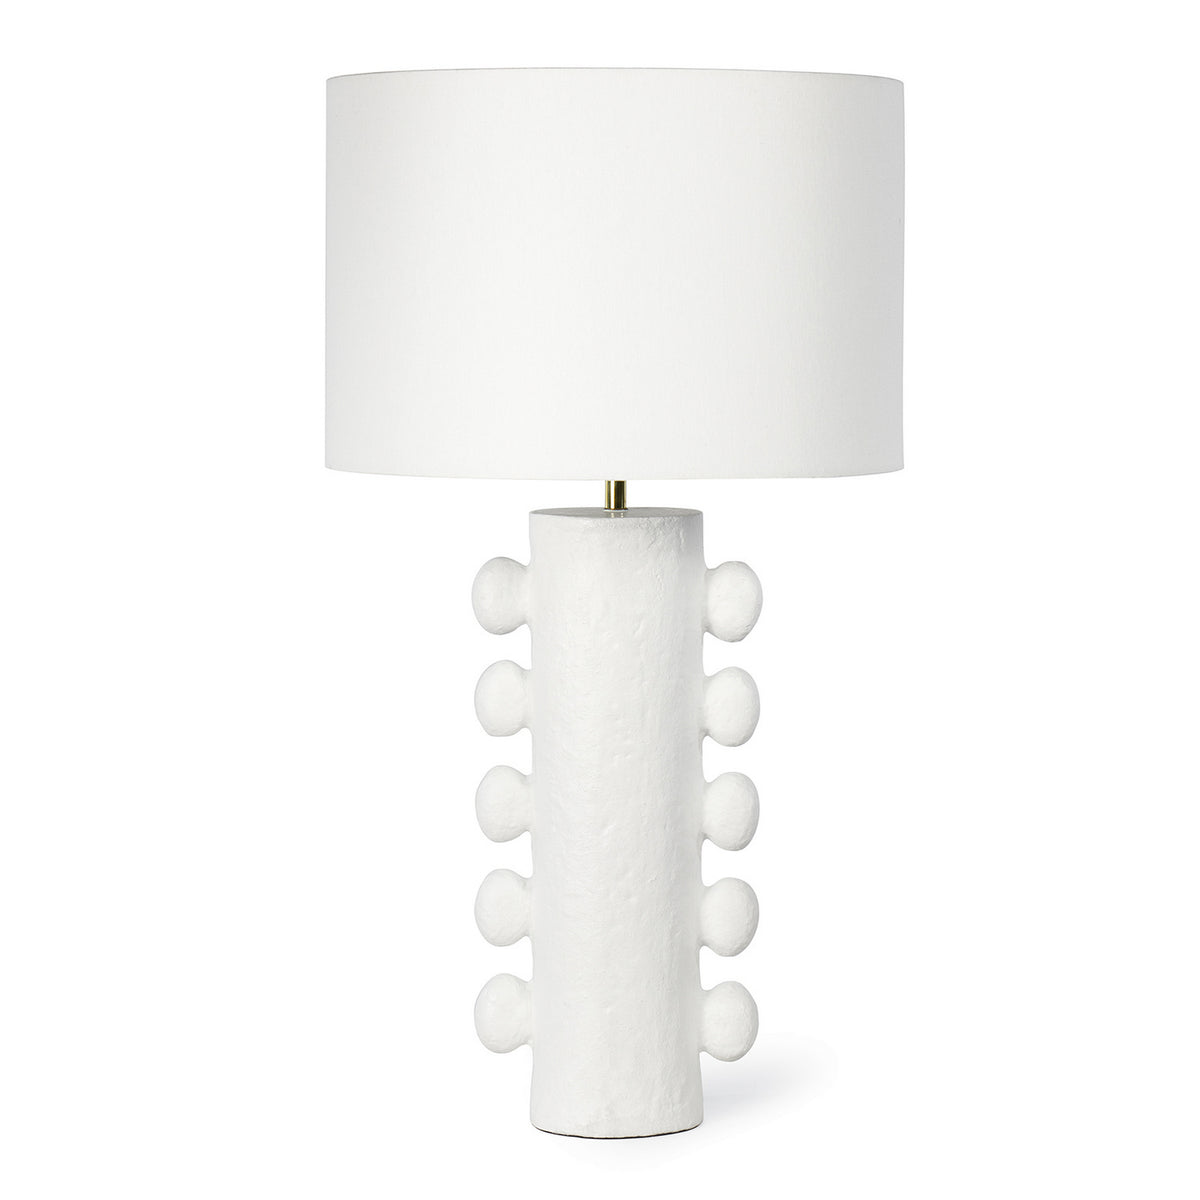 Regina Andrew One Light Table Lamp from the Sanya collection in White finish